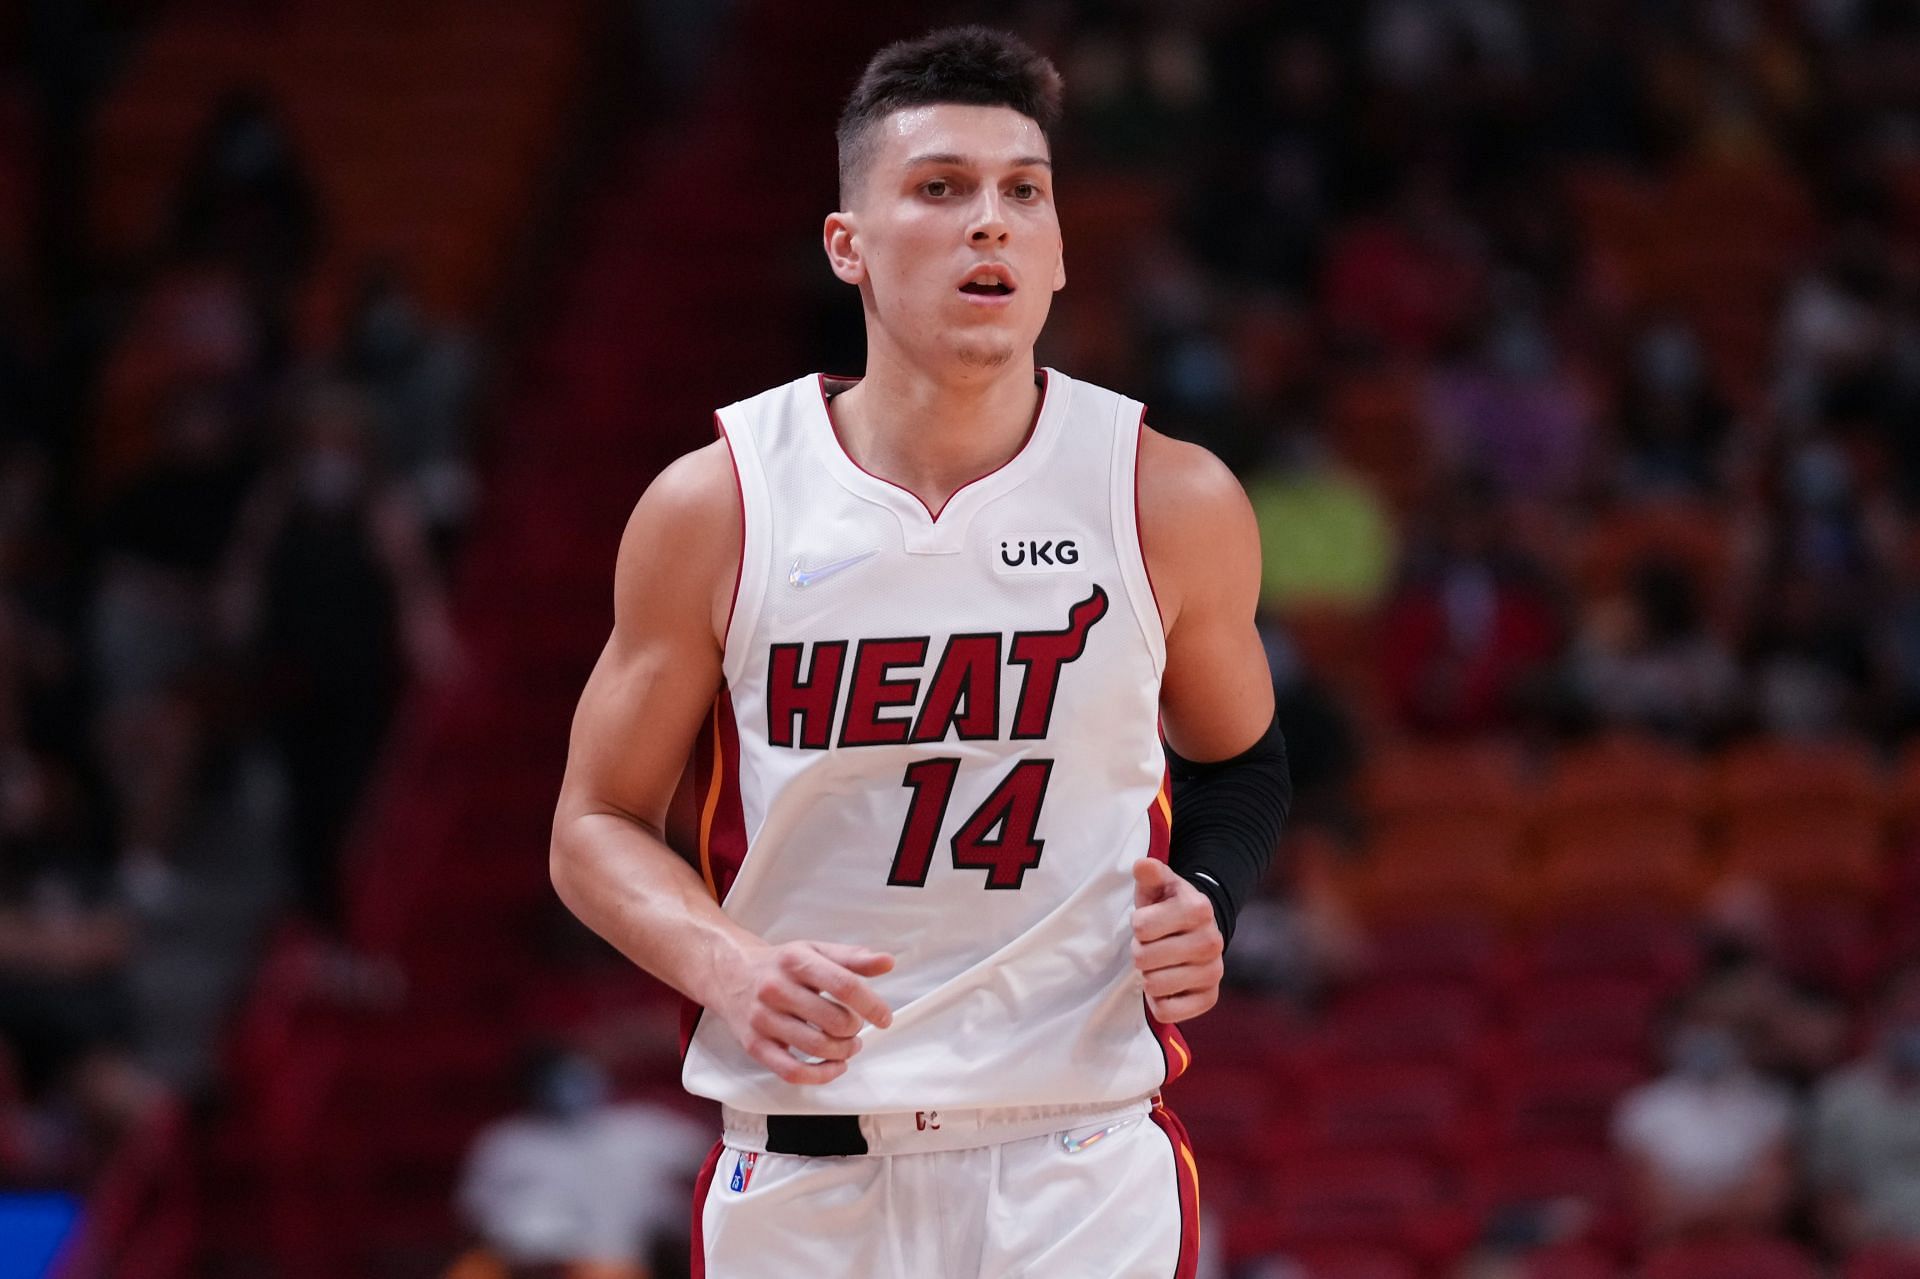 My Number: Miami Heat's Bam Ado on his jersey number